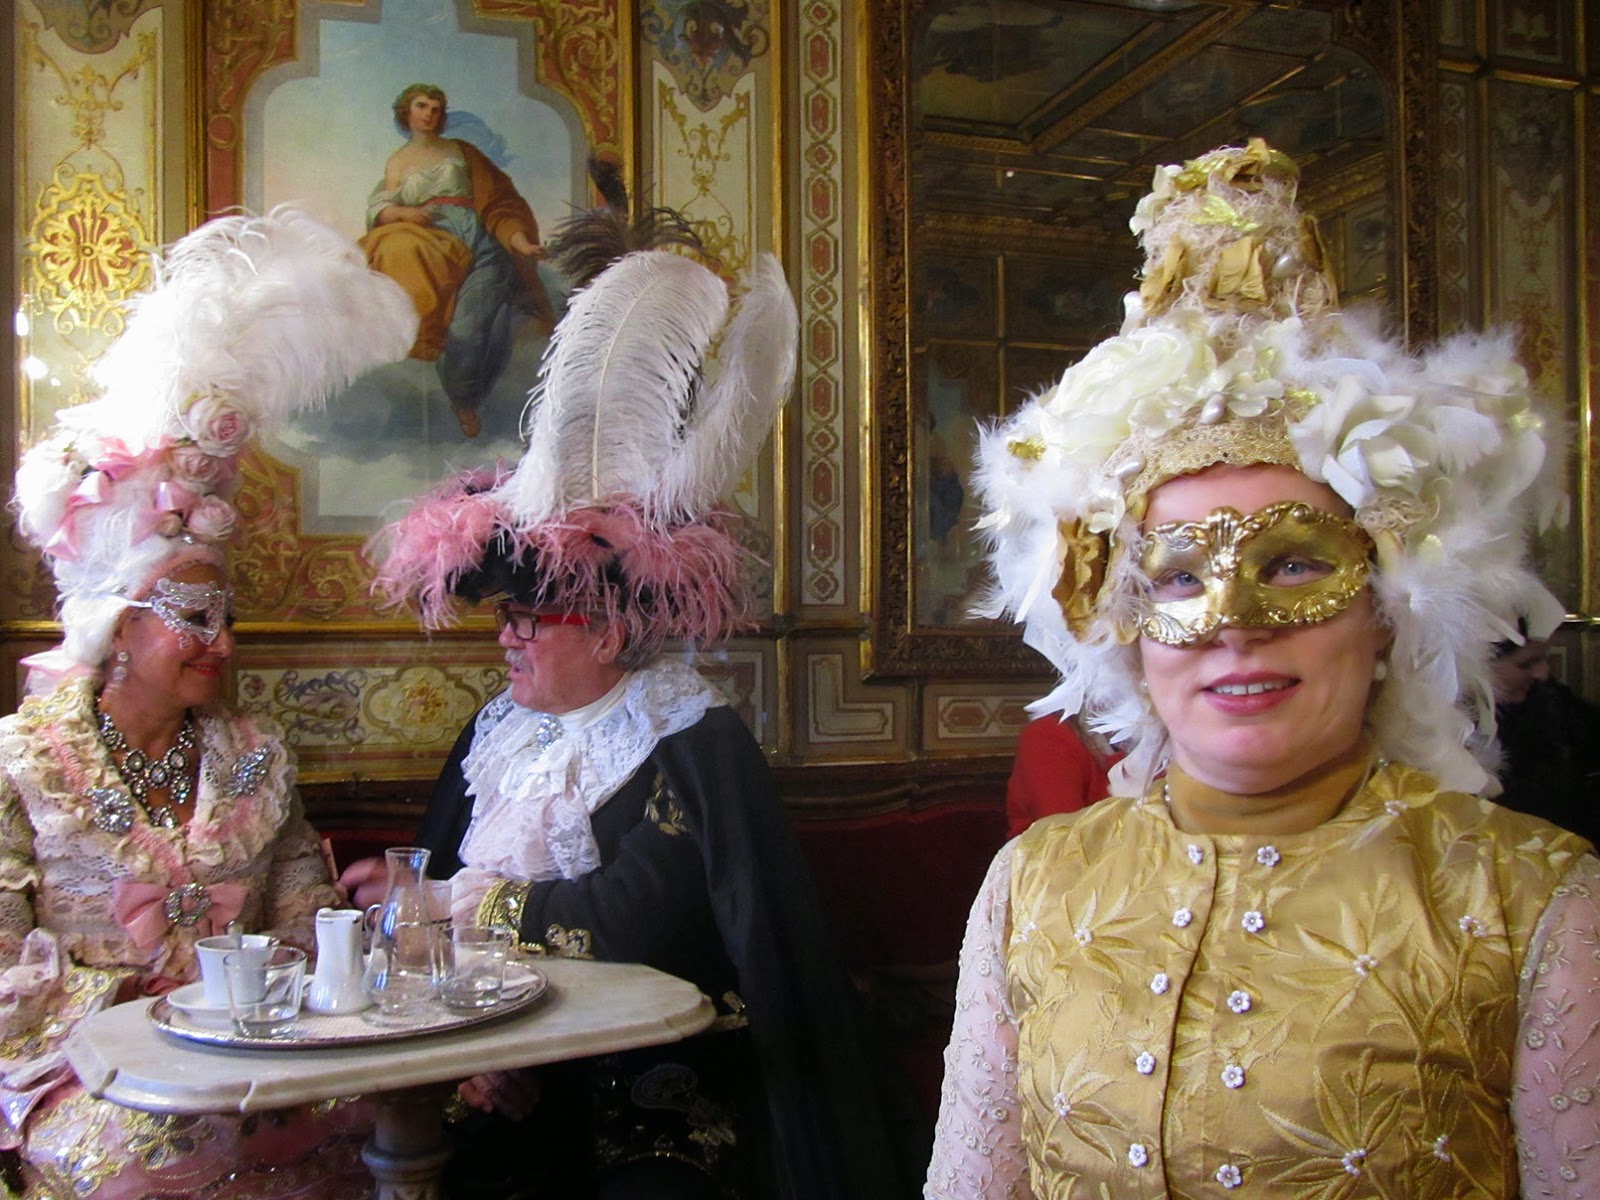 me and a costumed couple in caffè Florian